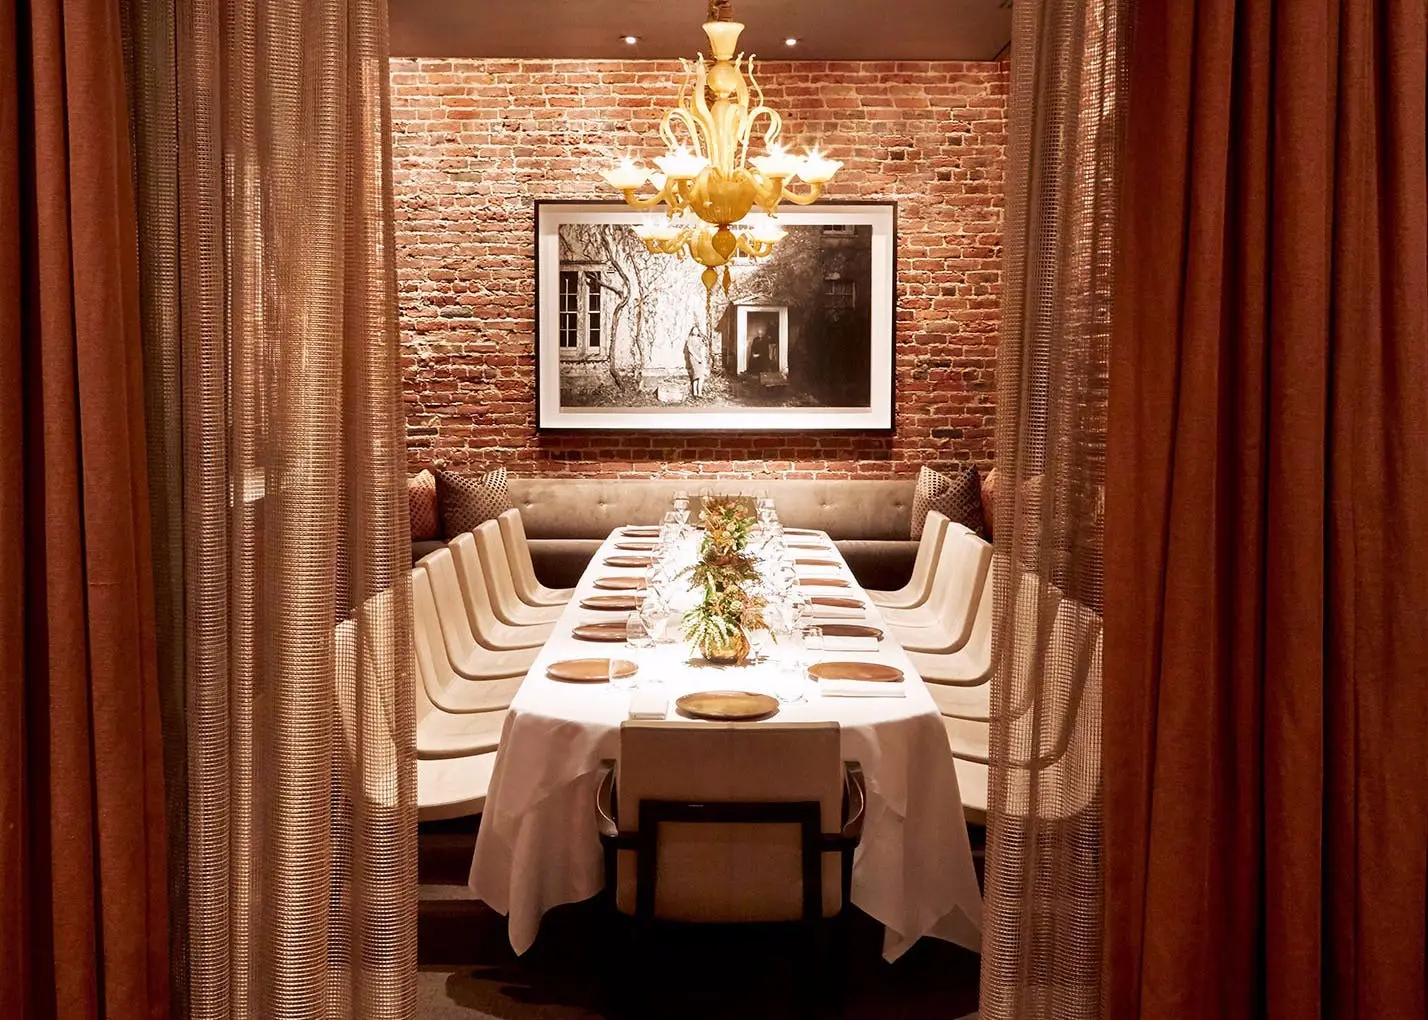 The elegant private dining room inside Quince.